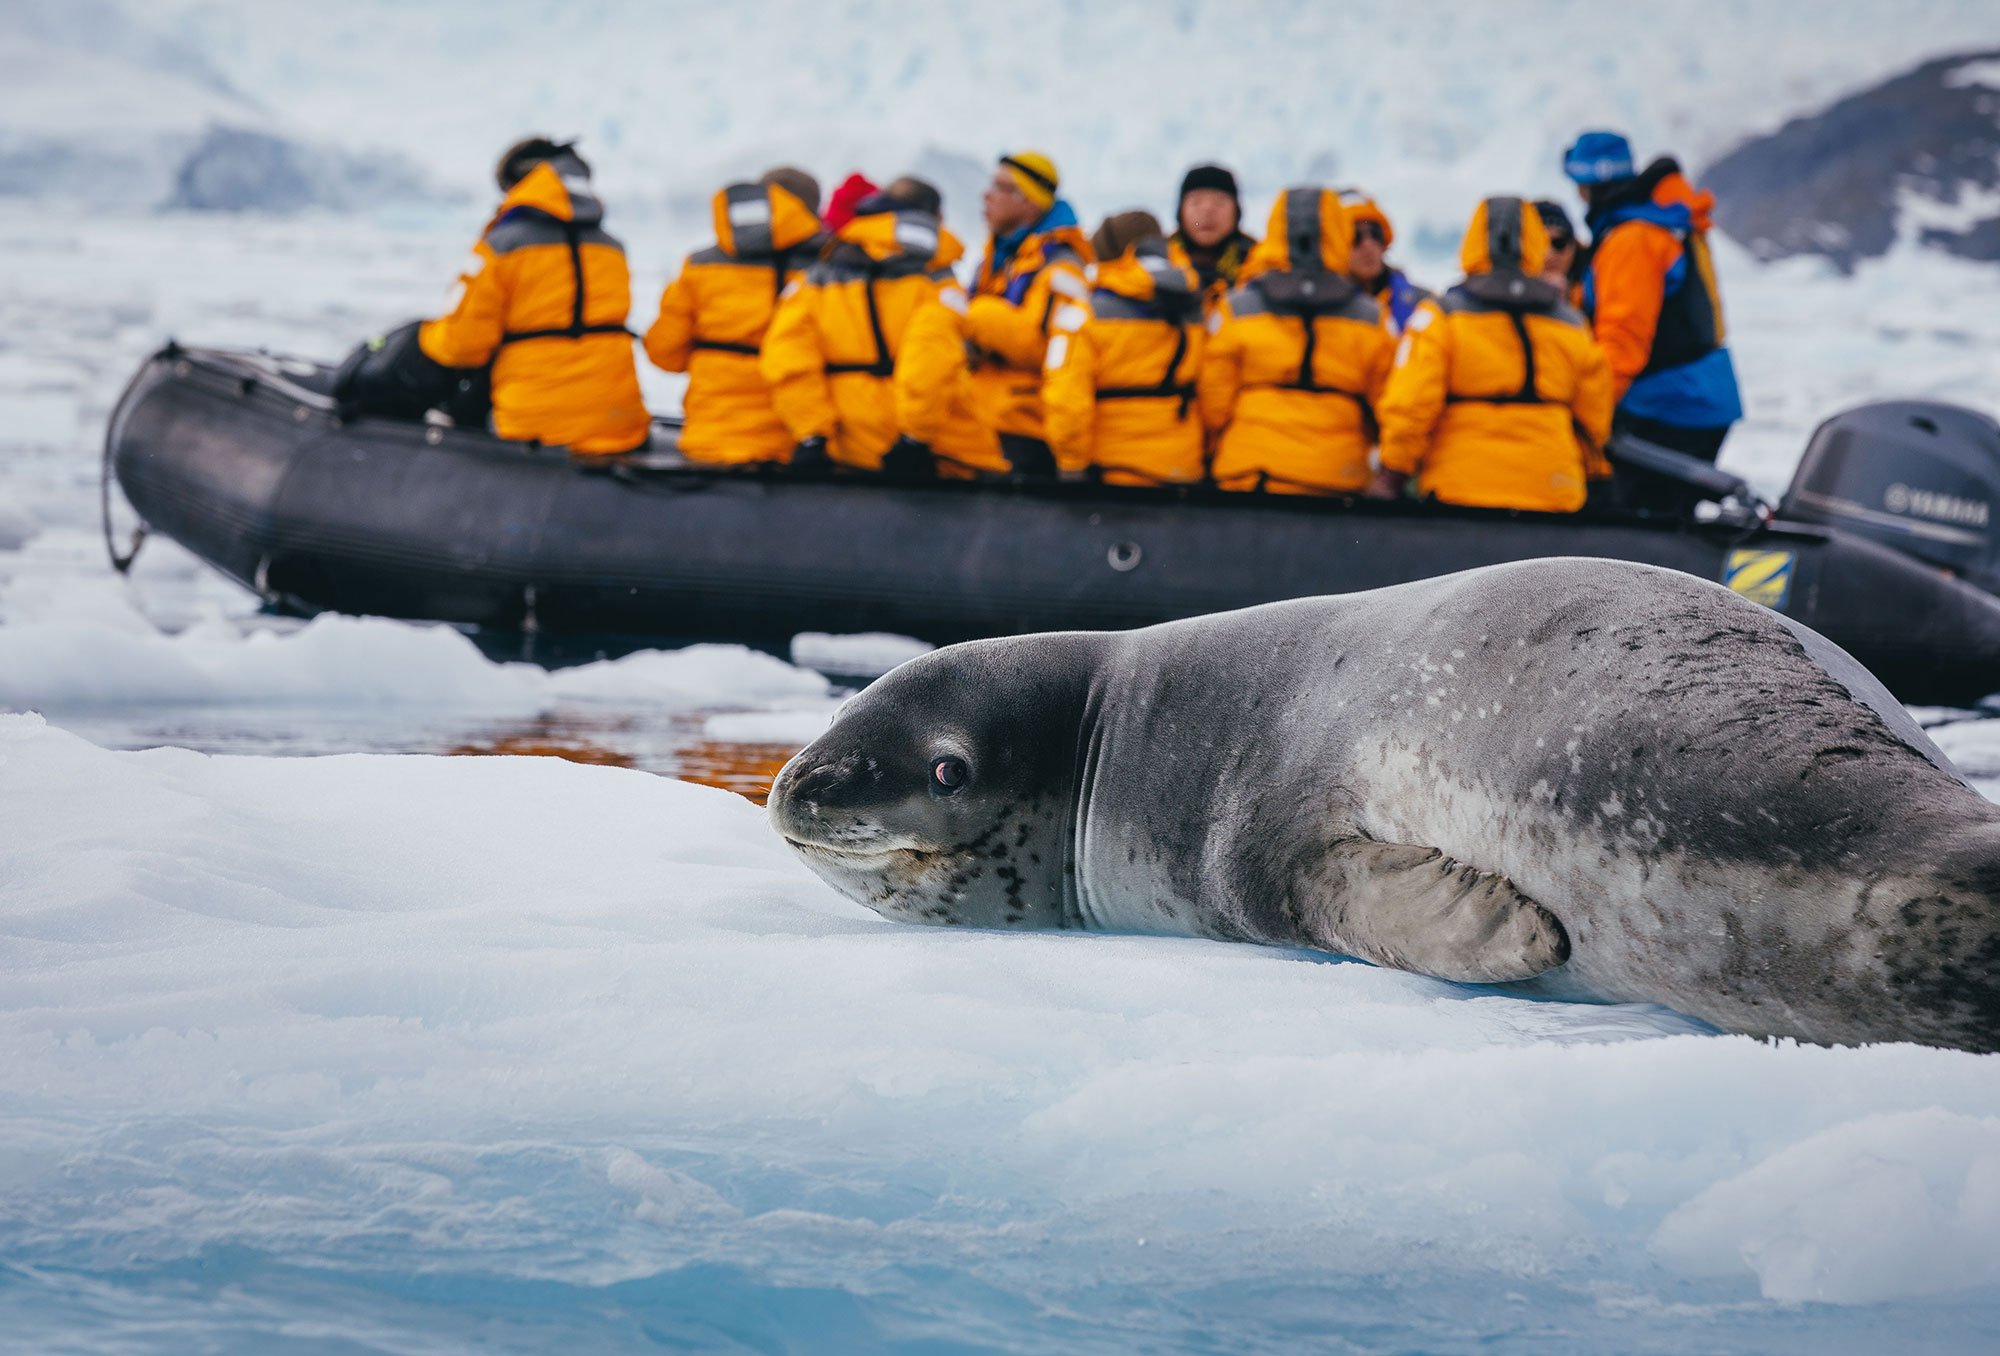 This leopard seal doesn’t seem bothered by the Zodiac of admirers in Cierva Cove.